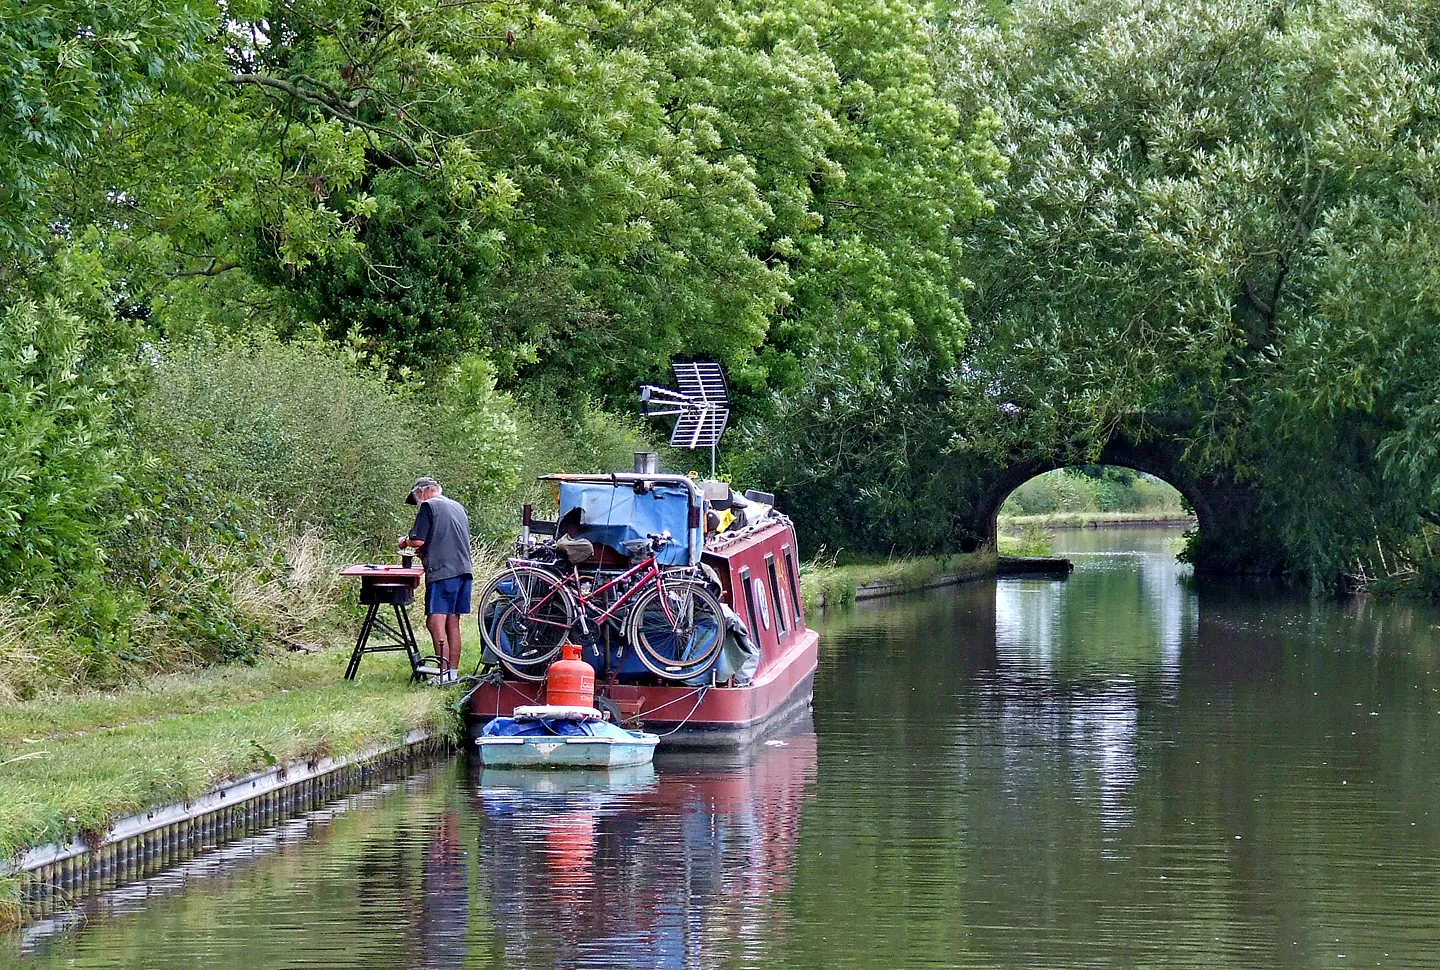 Photo showing: Boat maintenance, near Acton Trussell, Staffordshire The Staffordshire and Worcestershire Canal approaches Roseford Bridge (No 94) here. Work is in progress on the towpath by the narrowboat "Cholet".